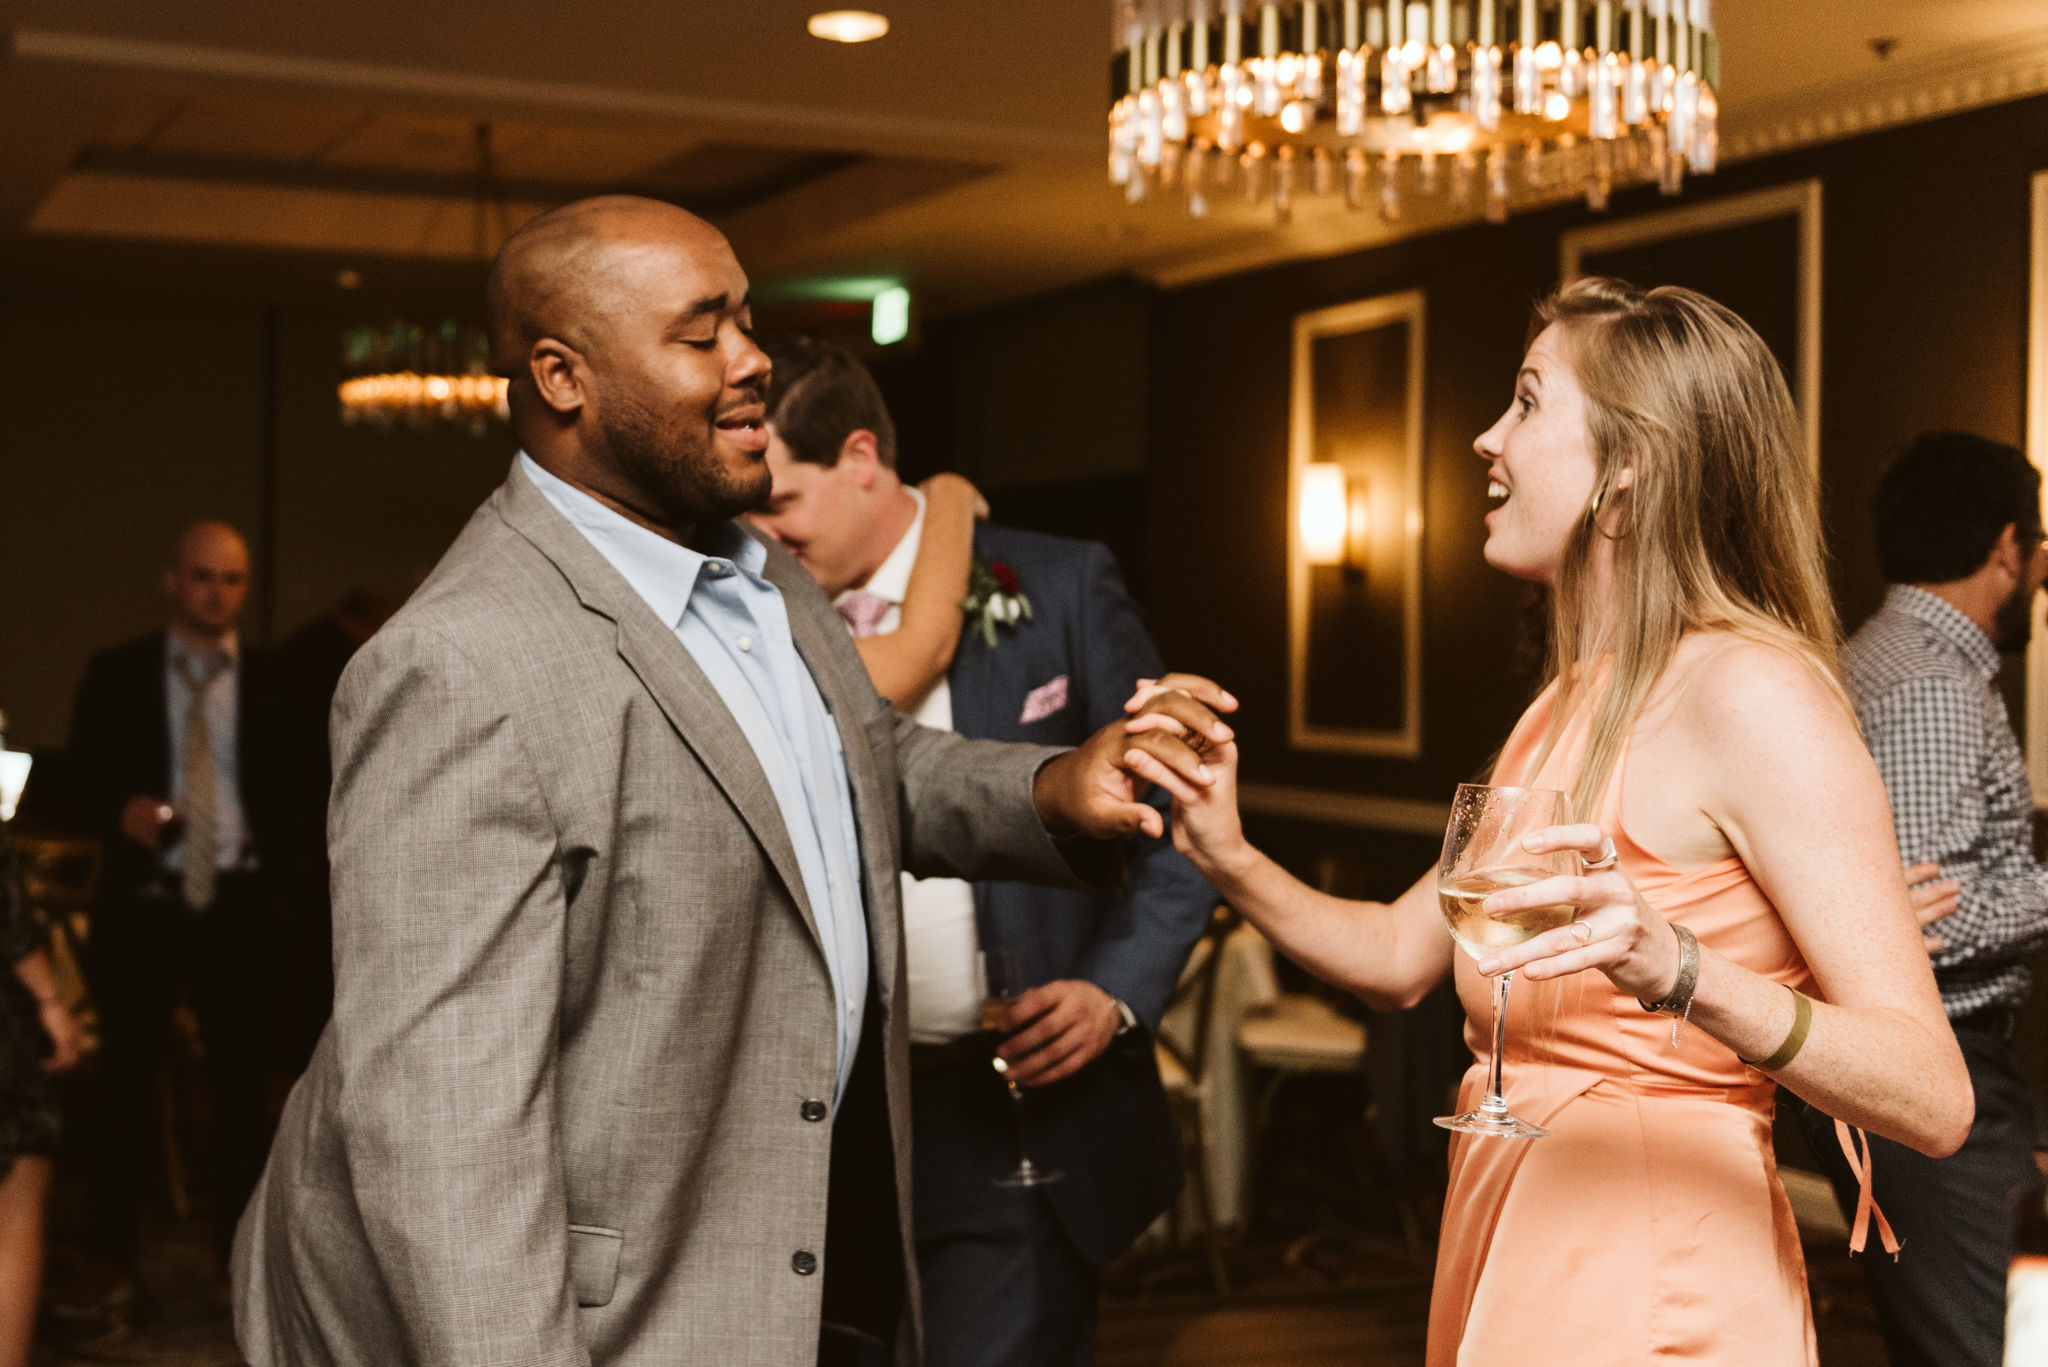  Phoenix Maryland, Baltimore Wedding Photographer, Eagle’s Nest Country Club, Classic, Romantic, Couple Dancing and Singing at Reception 